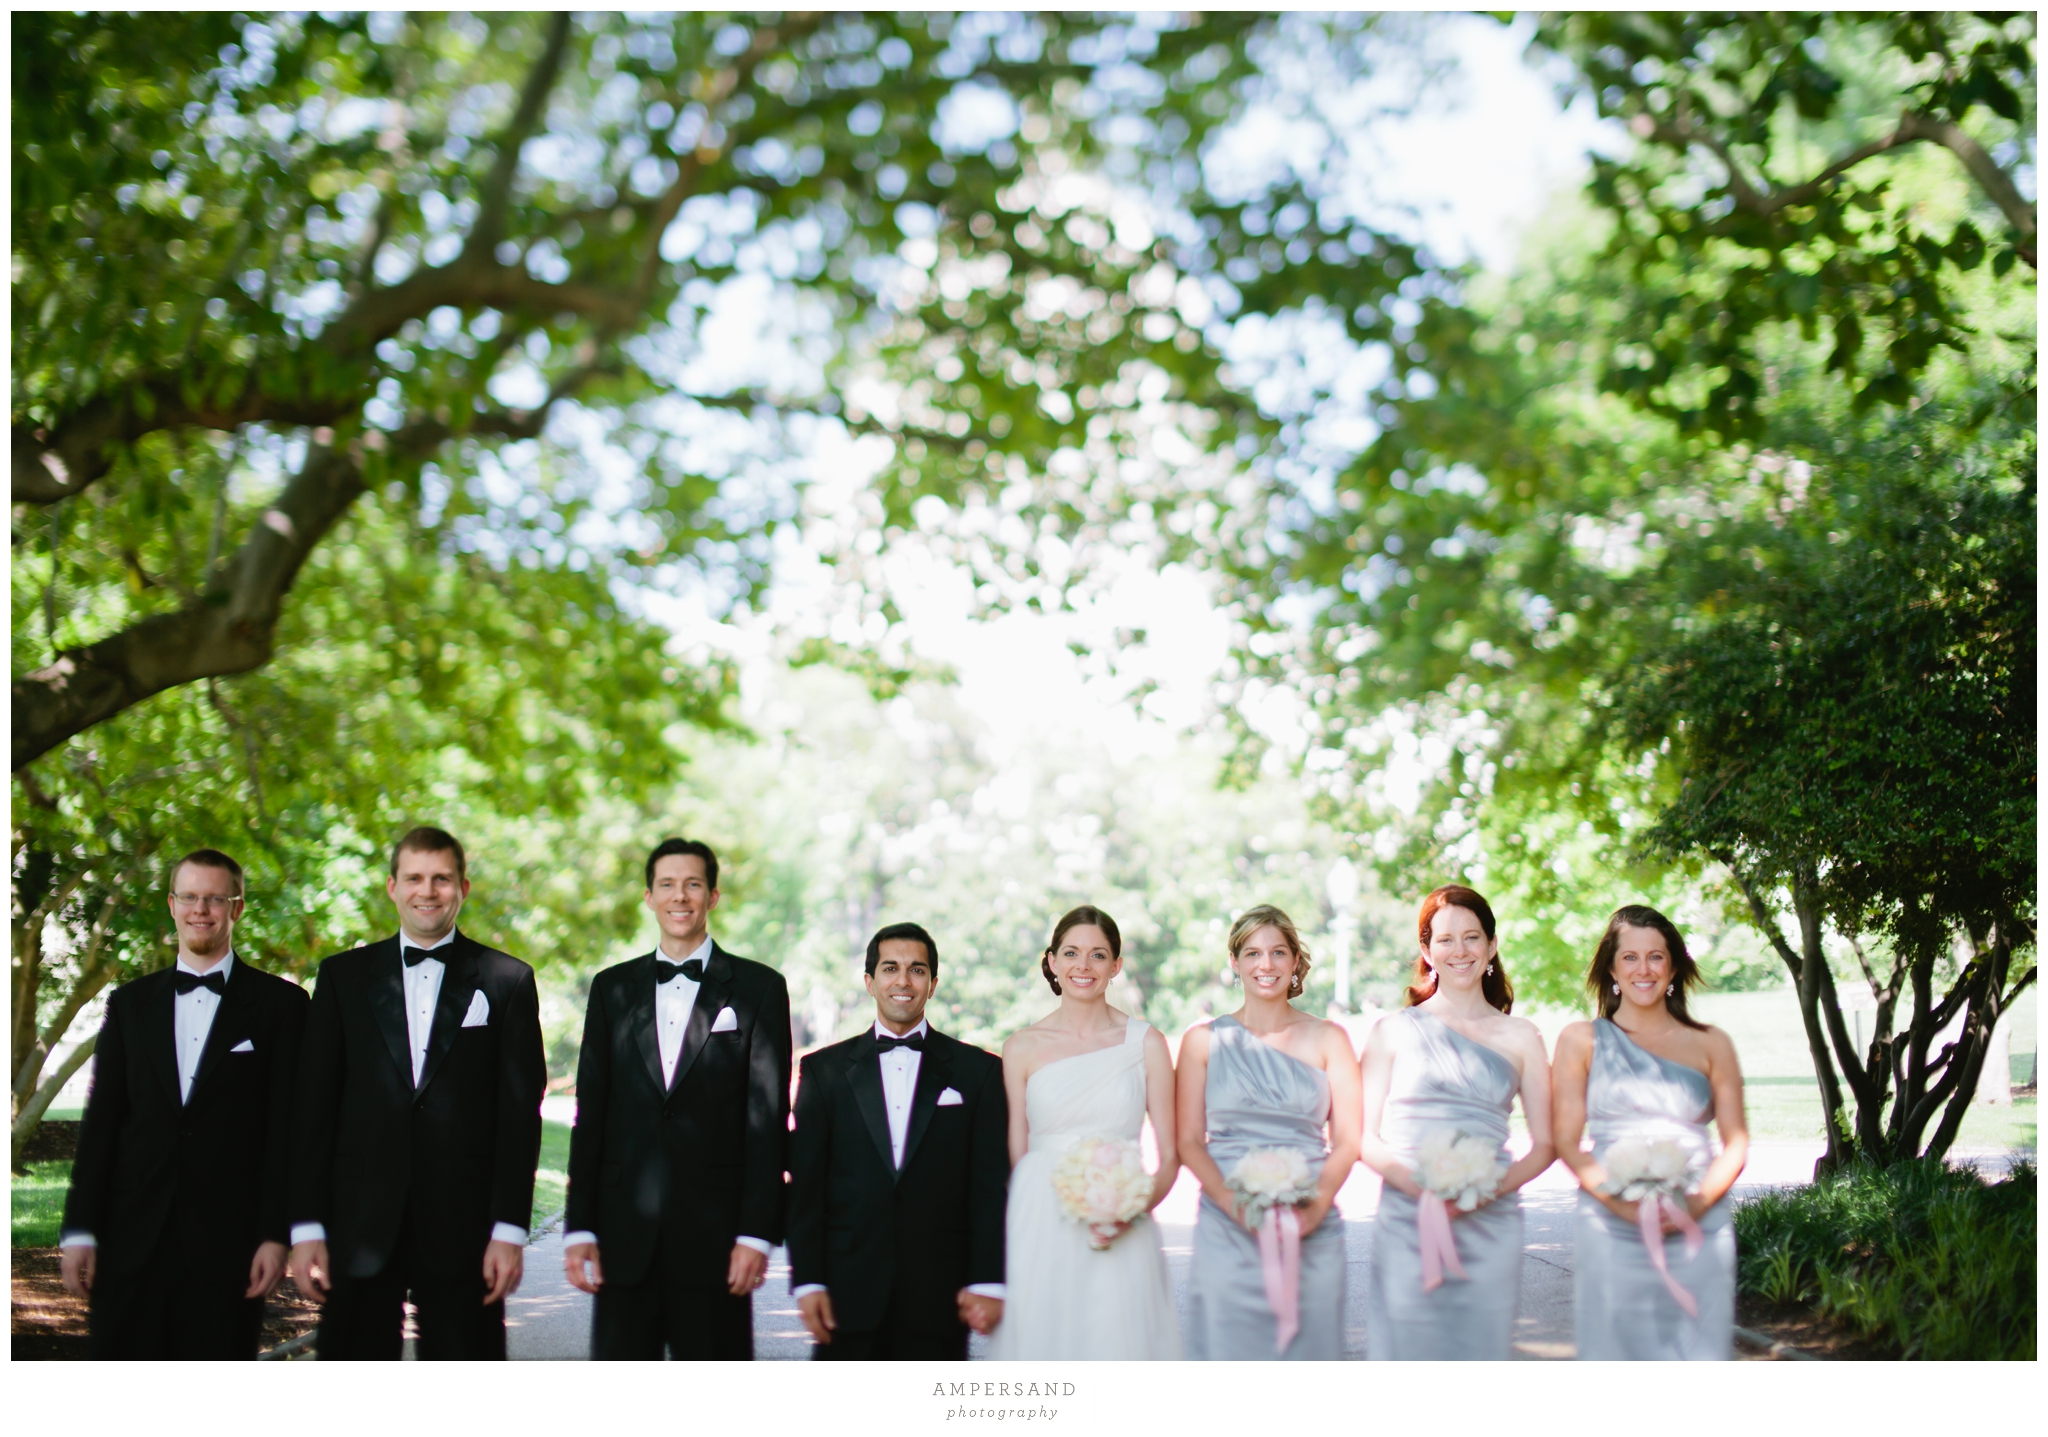 Bridal party // Photos by Ampersand Photography